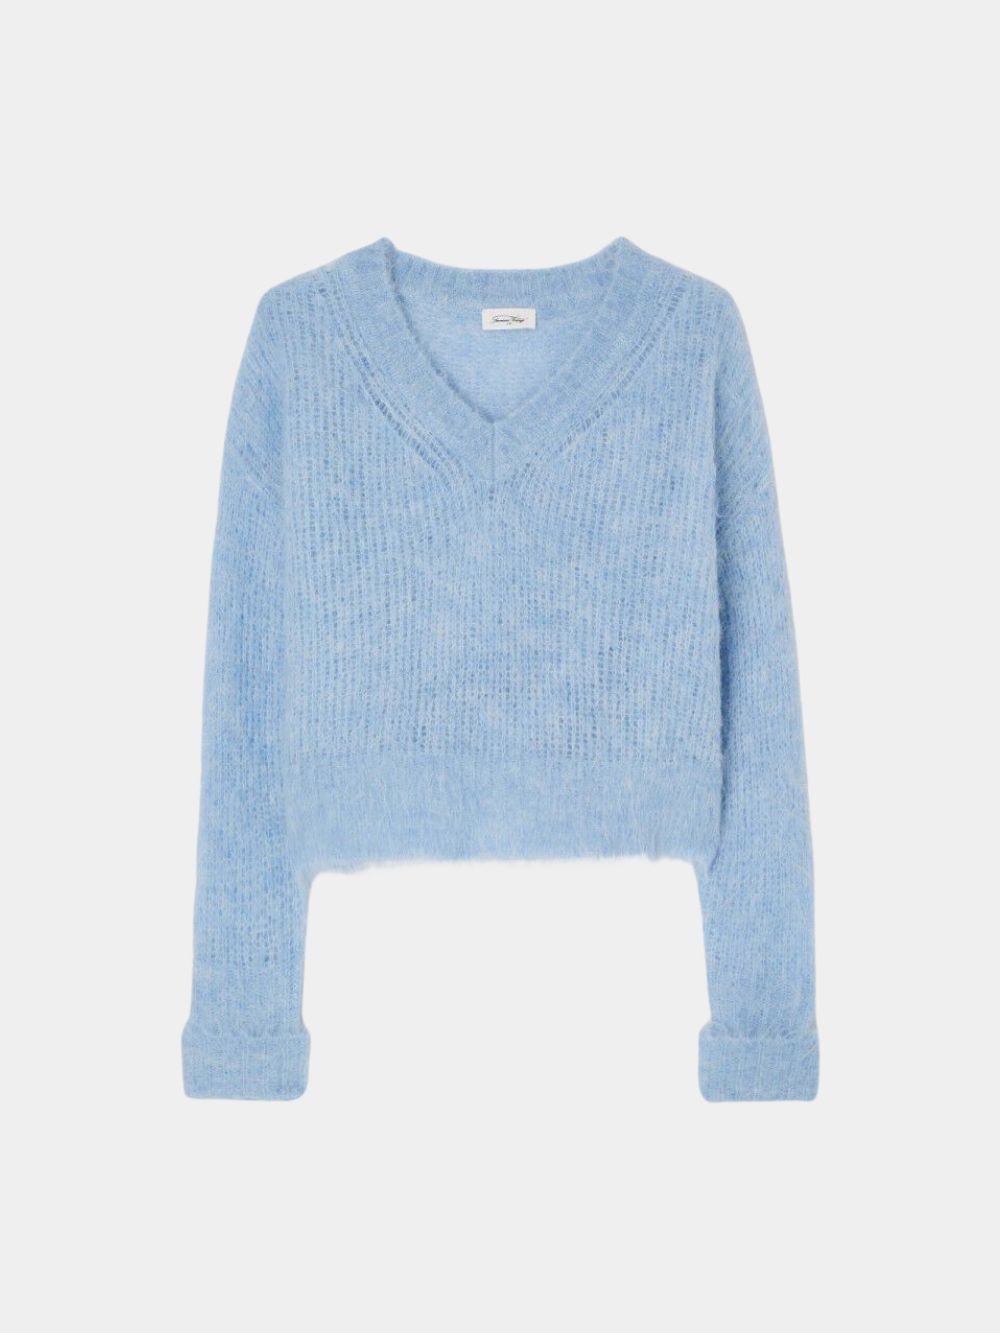 American Vintage Bymi Jumper in Fontaine